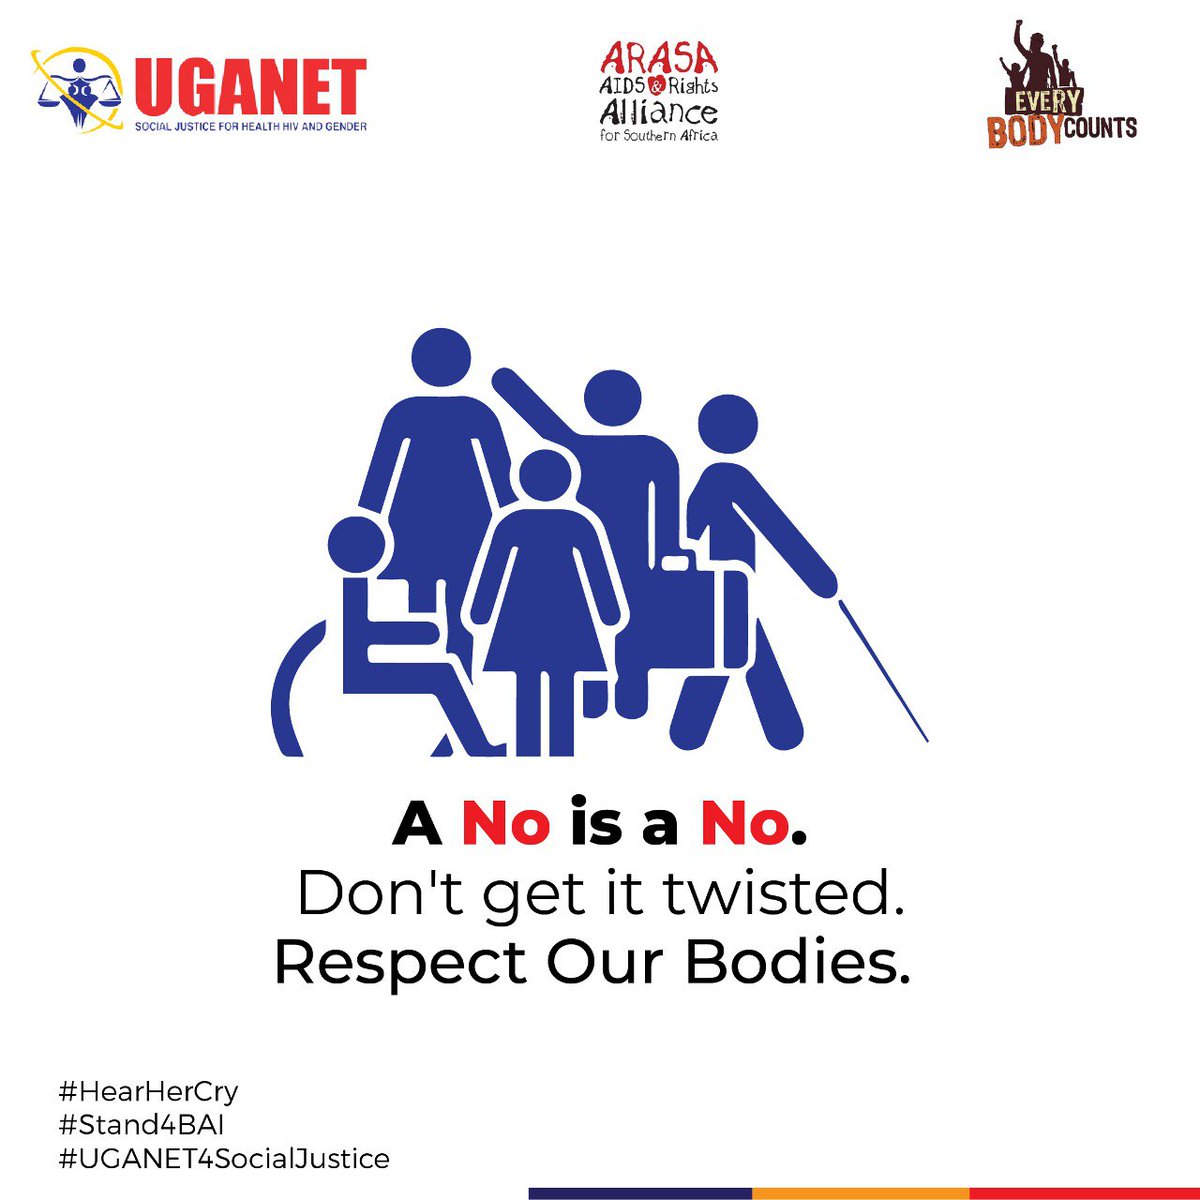 Everyone's body must be respected, whether they are a girl, woman, boy, man, a person living with a disability or anyone else. 

#Stand4BAI
#UGANET4SocialJustice